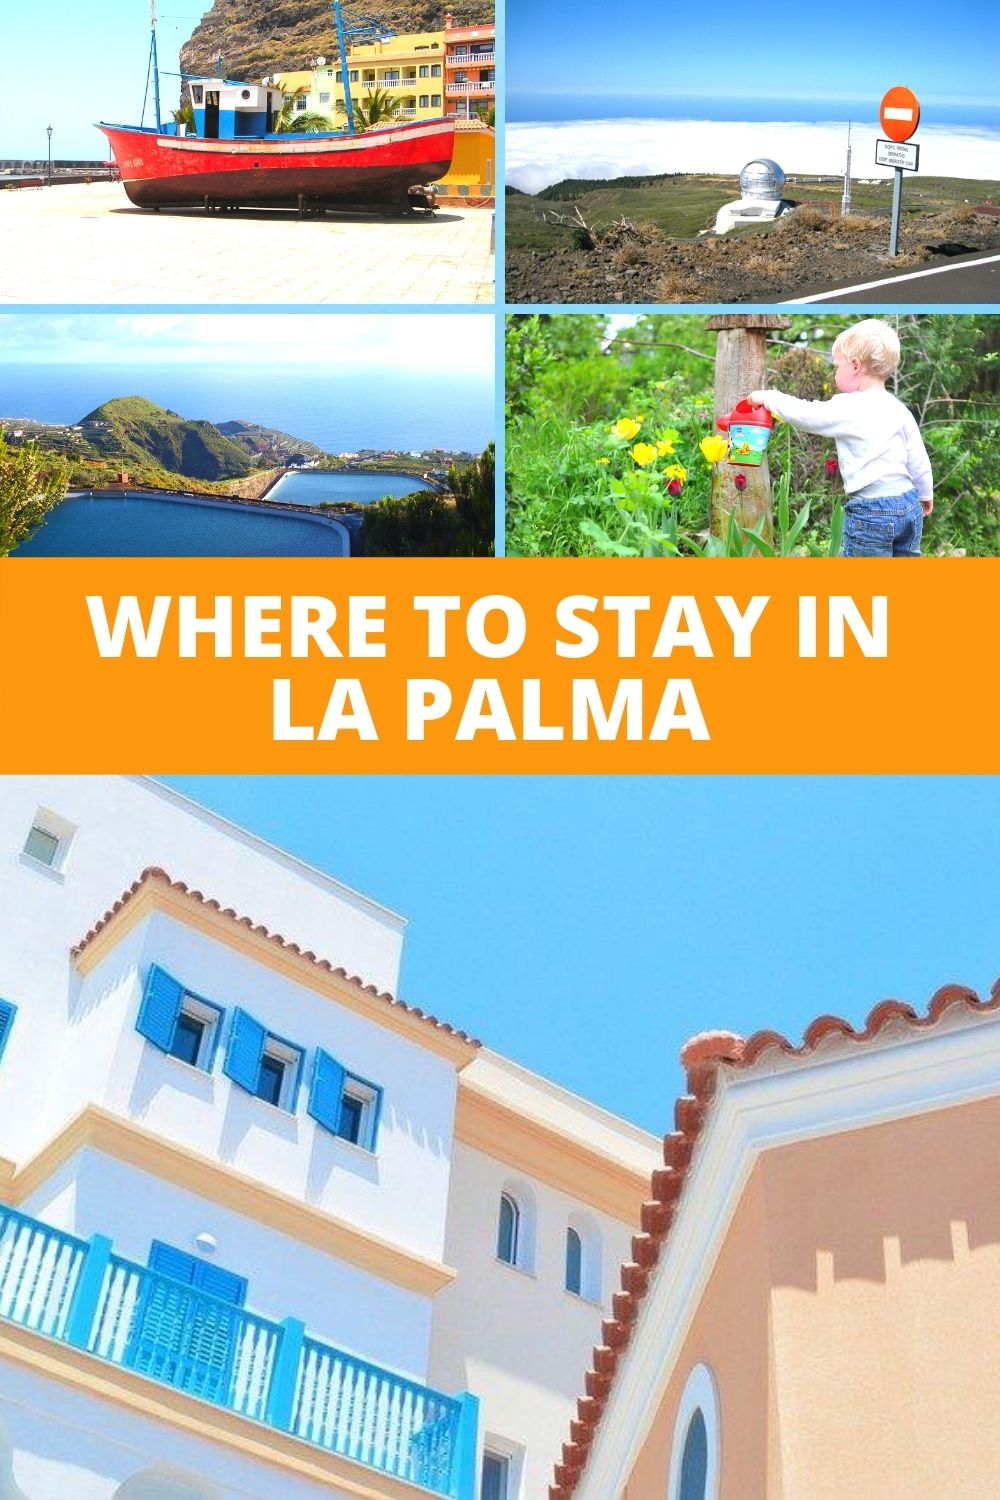 Where to Stay in La Palma - Best Areas & Hotels on the island